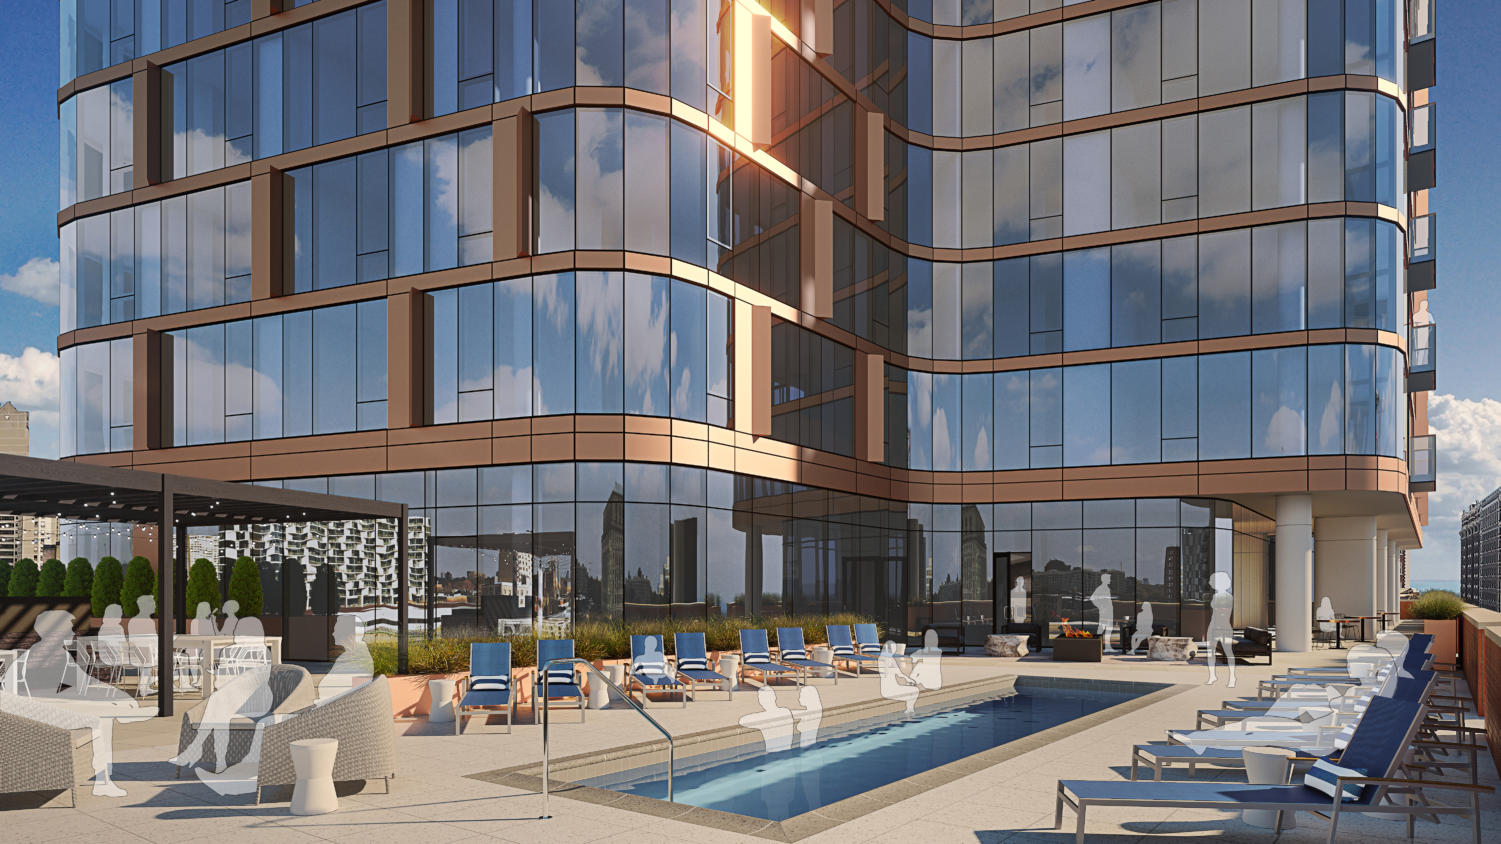 A rendering of the pool area at 5252 S. Cornell Avenue, which expects to open for move-ins beginning in September 2019.